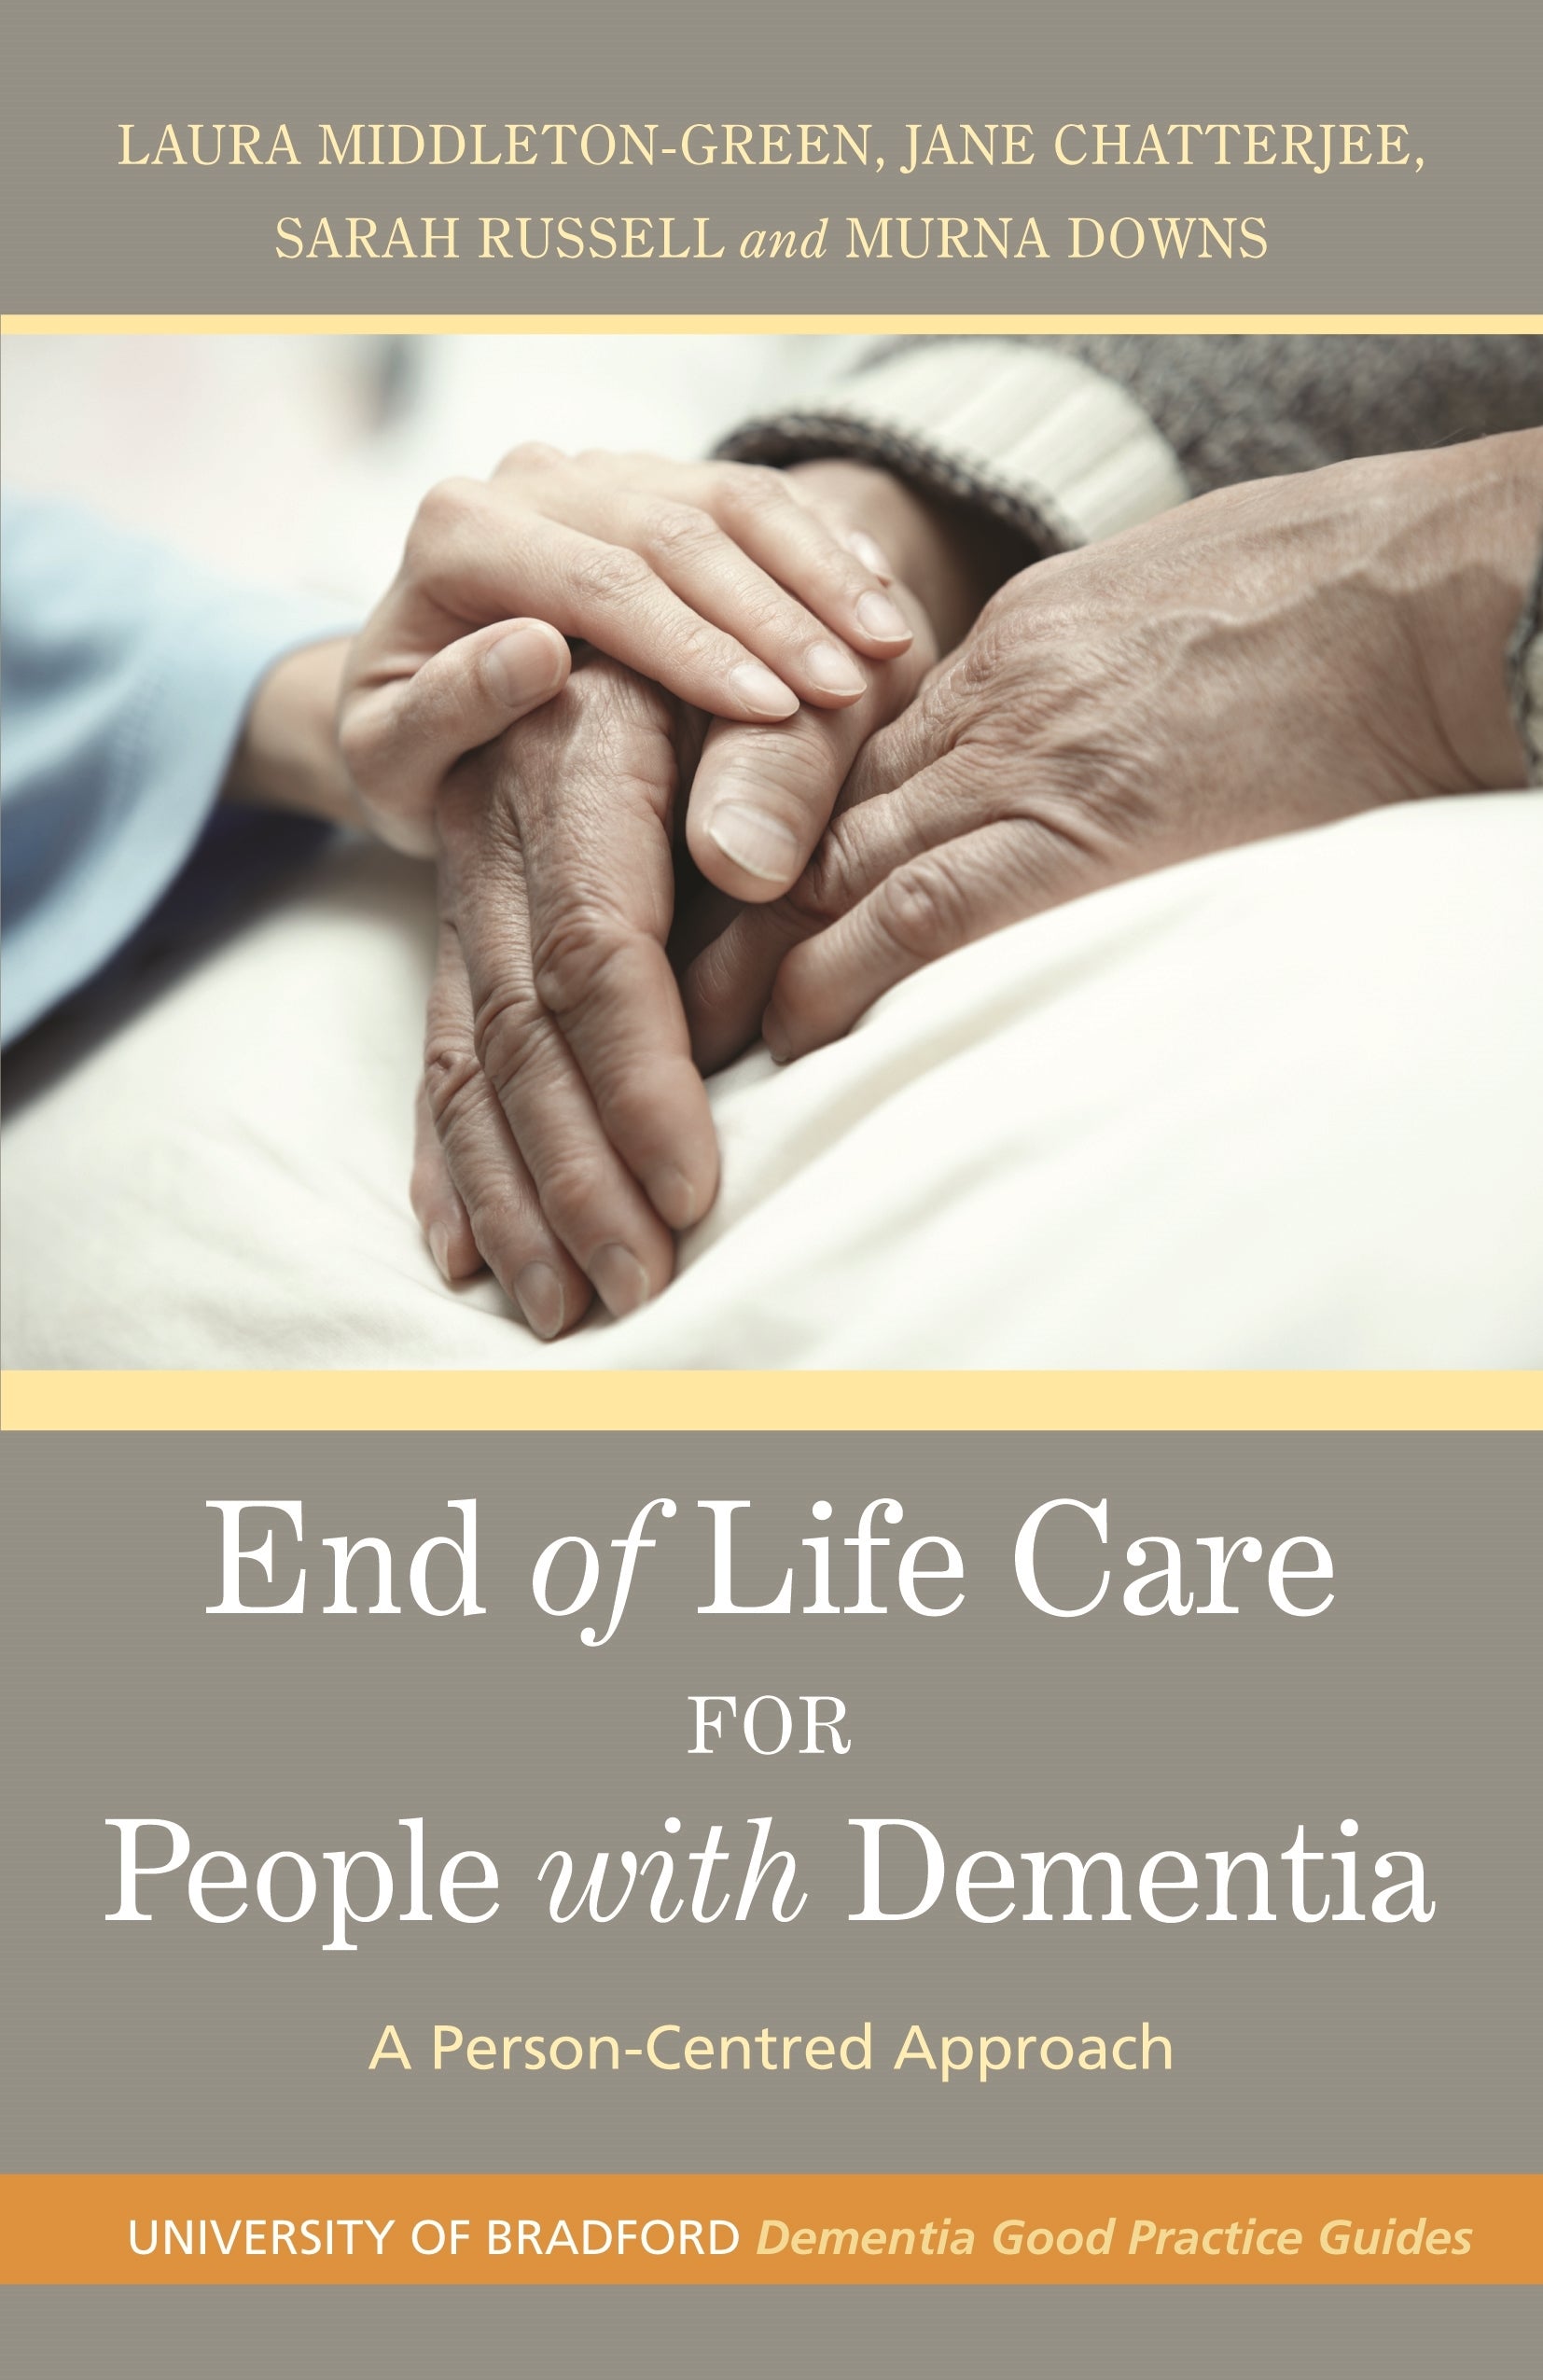 End of Life Care for People with Dementia by Murna Downs, Laura Middleton-Green, Sarah Russell, Jane Chatterjee